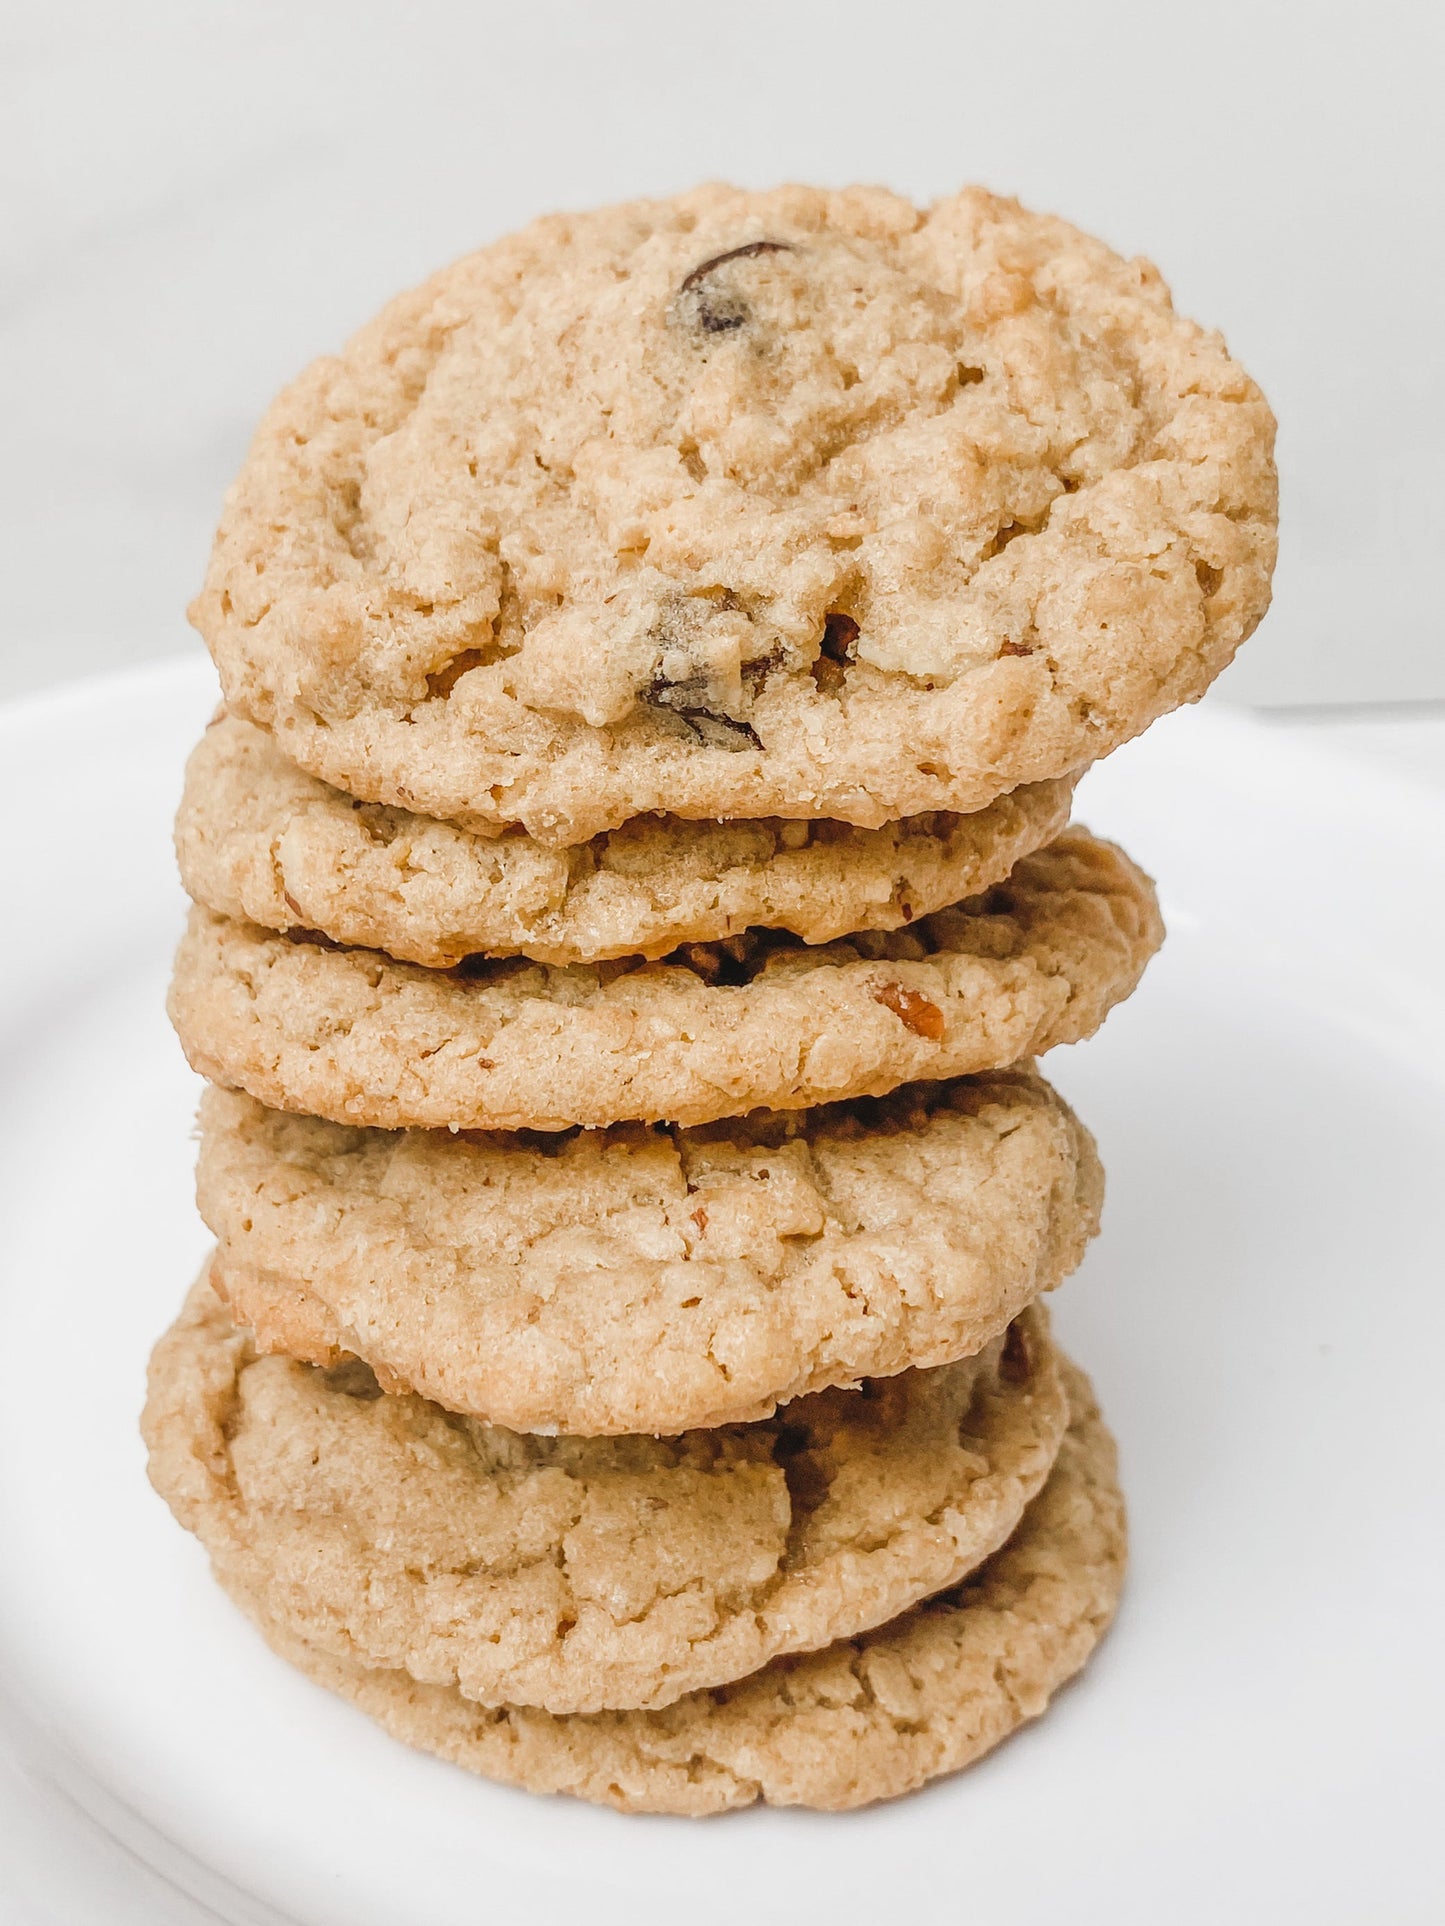 Double 40 Oatmeal Cookie Mix